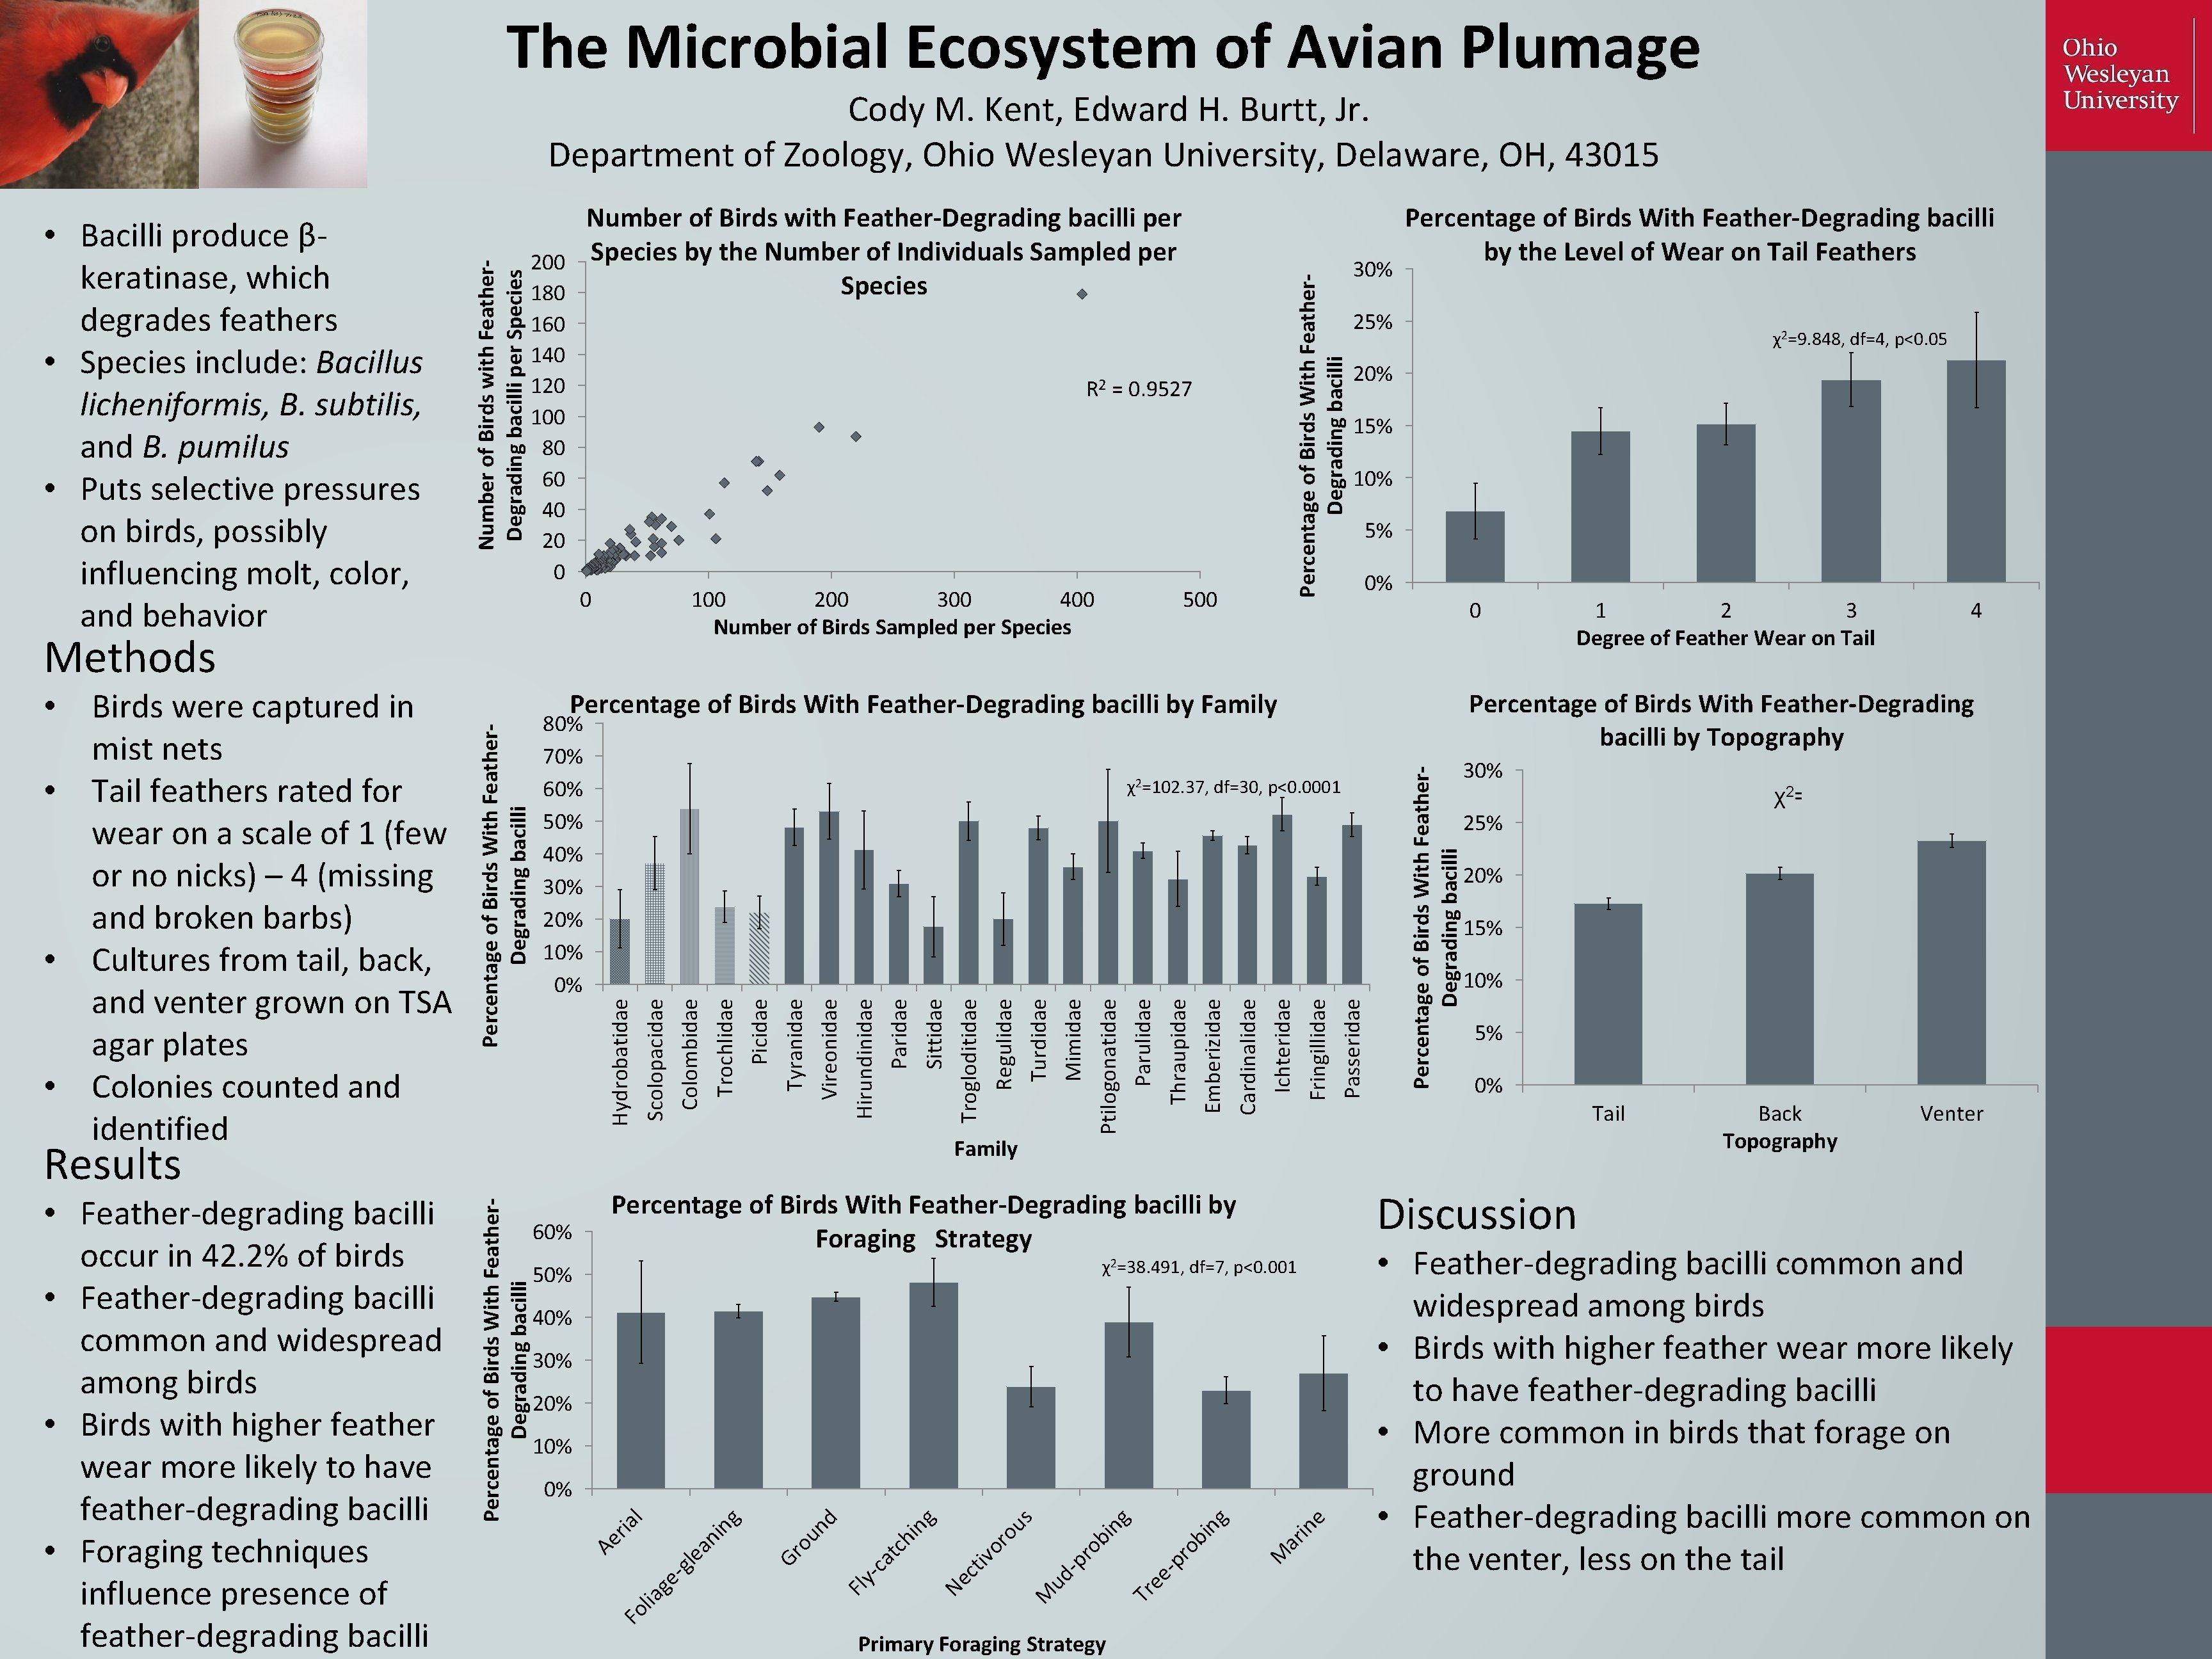 The Microbial Ecosystem of Avian Plumage 160 140 120 100 80 60 40 20